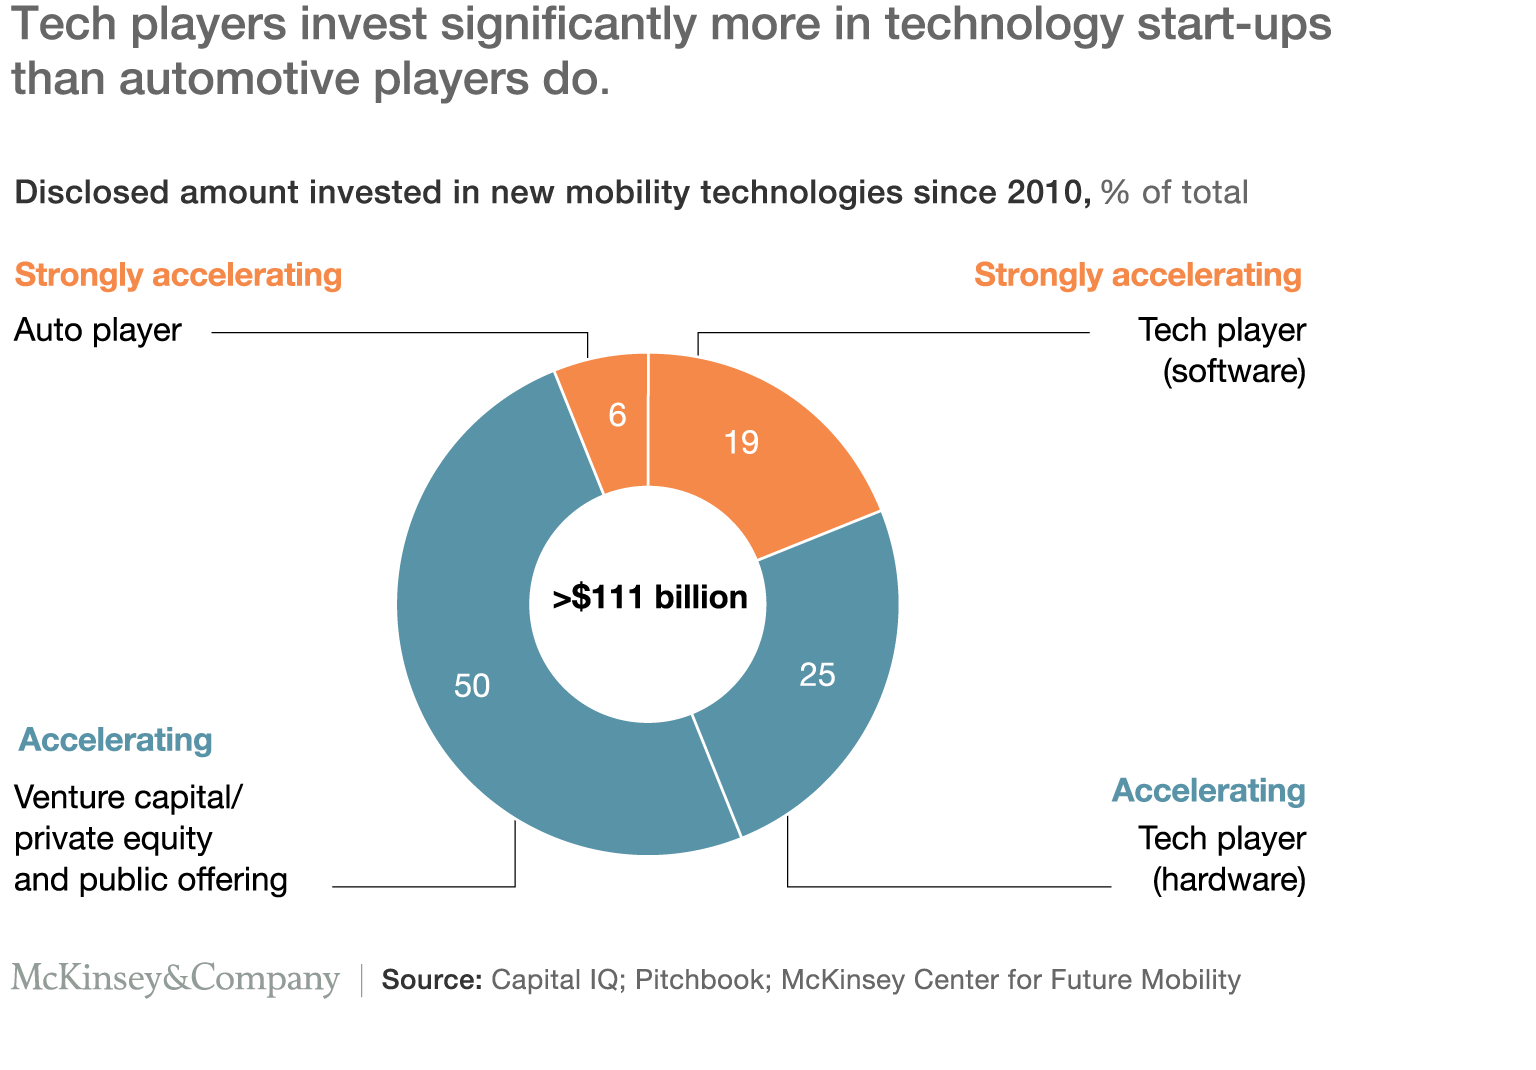 Tech players invest signicantly more in technology start-ups than automotive players do.